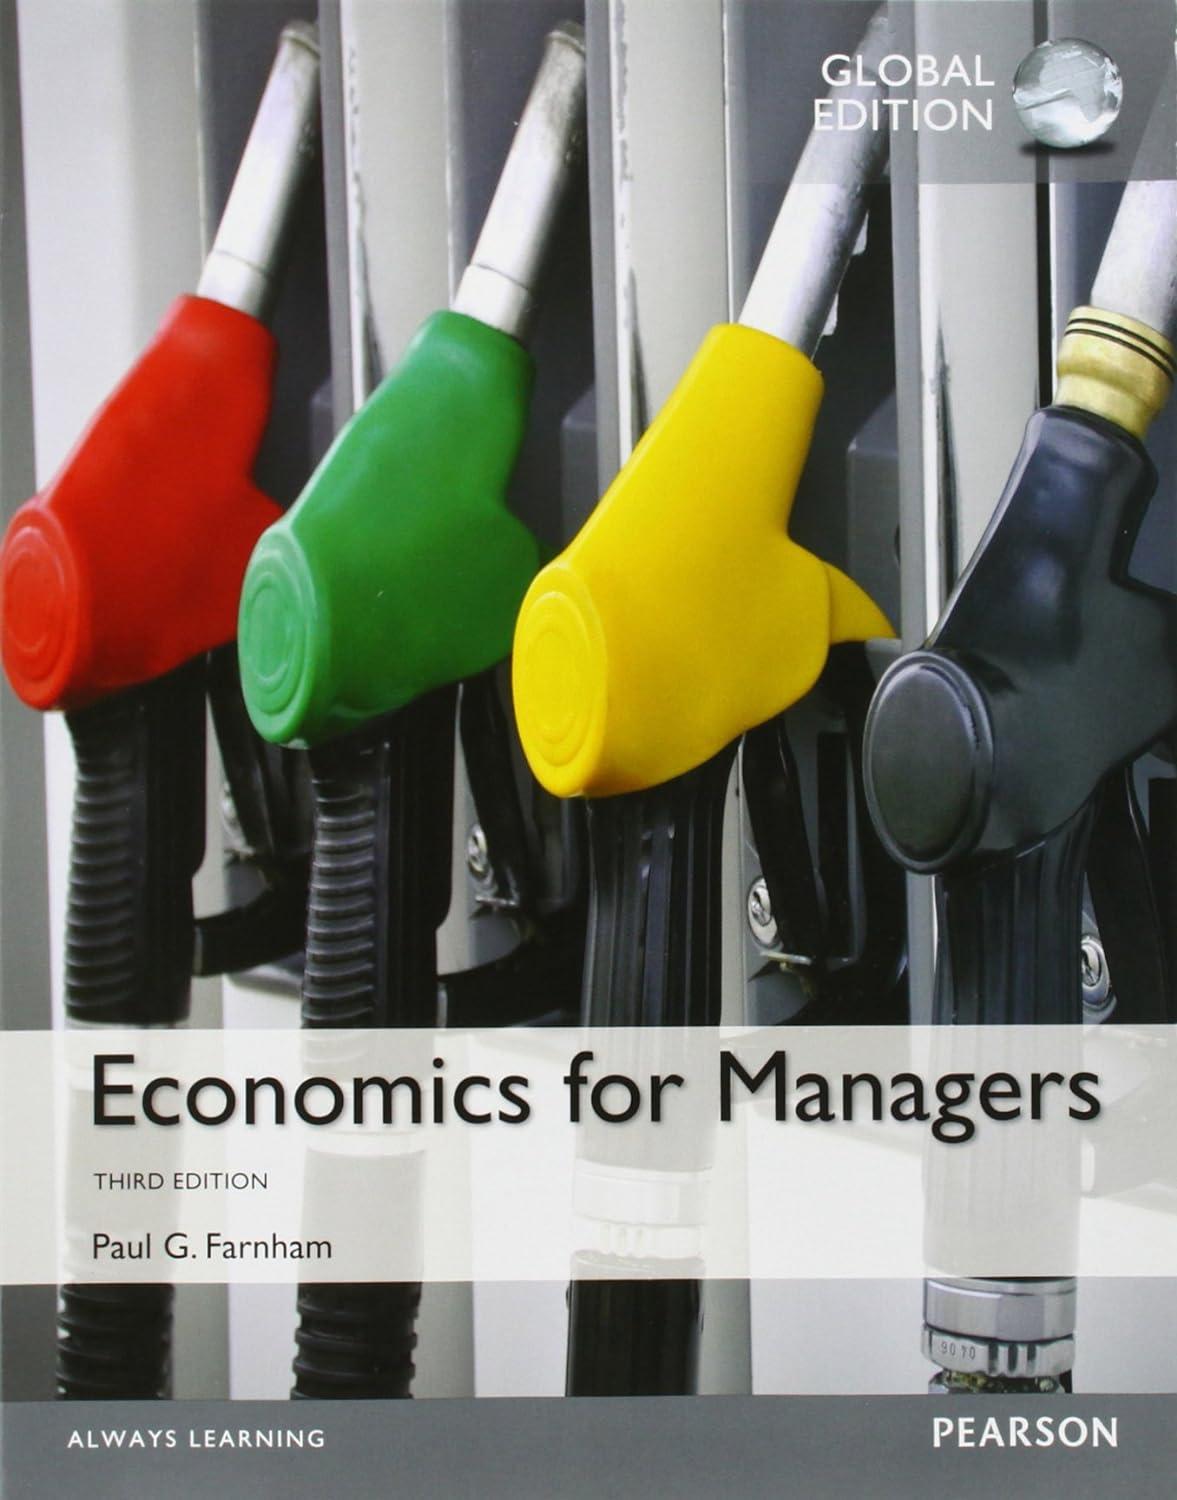 economics for managers 3rd global edition paul farnham 1292060093, 978-1292060095